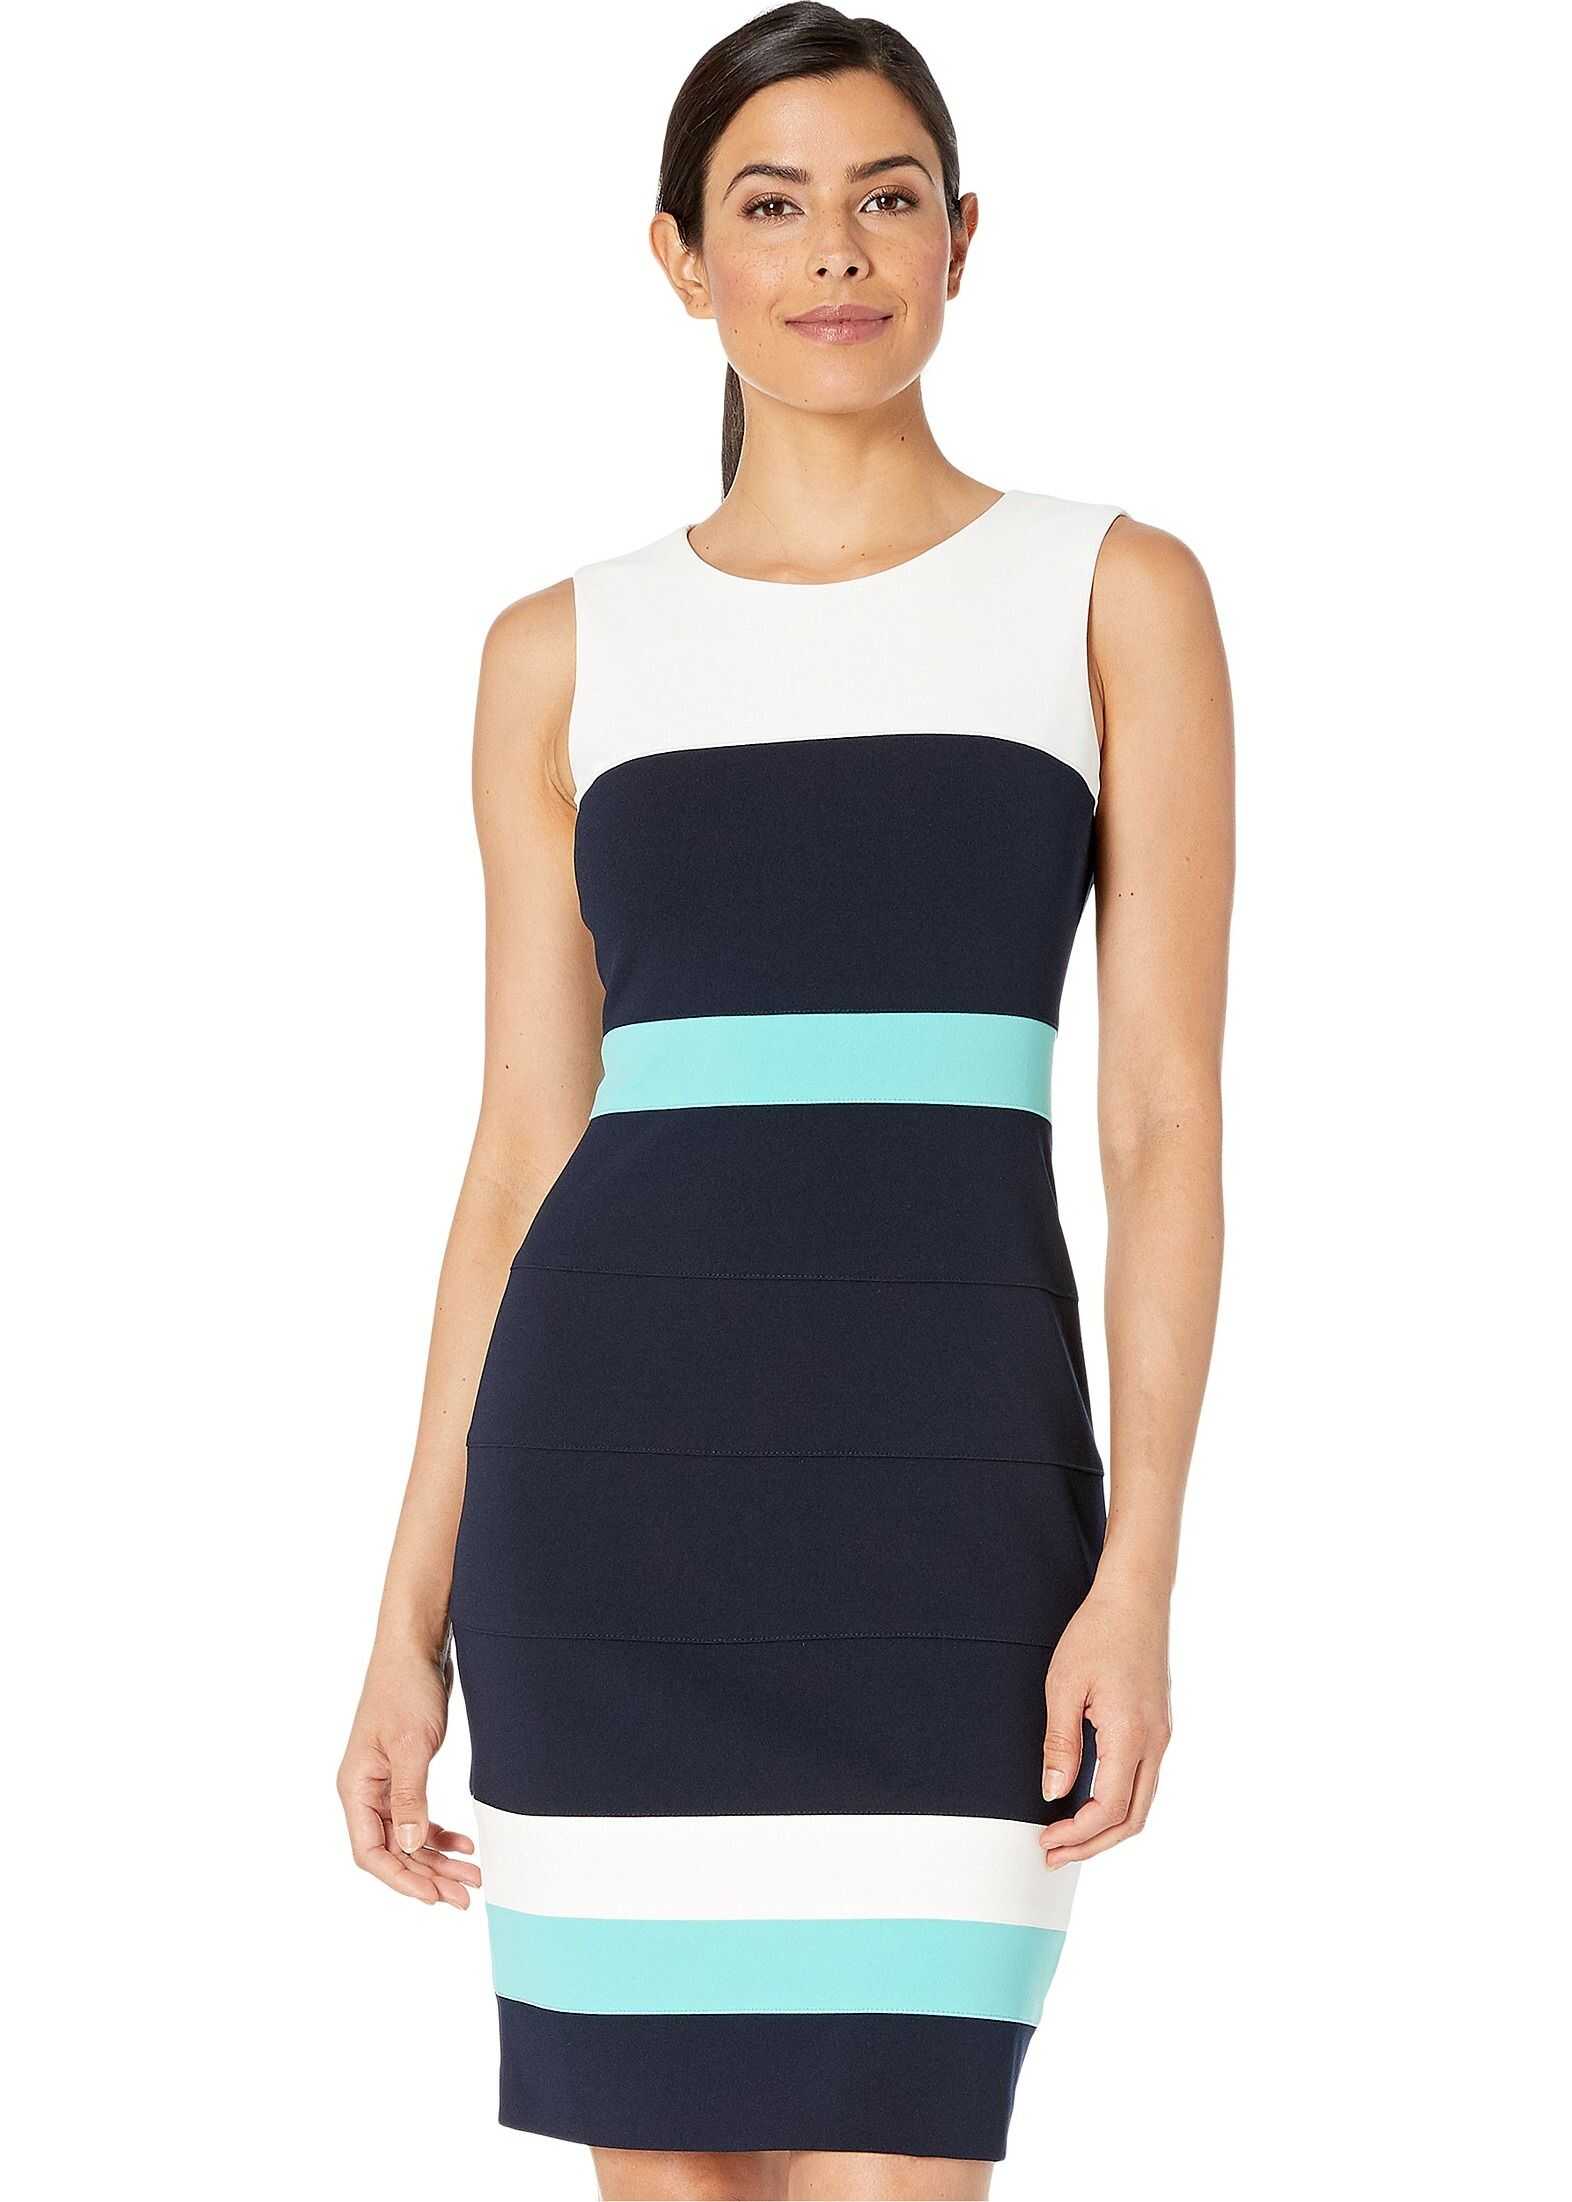 Tommy Hilfiger Color Block Sheath Dress Ivory/Sky Captain/Waterfall